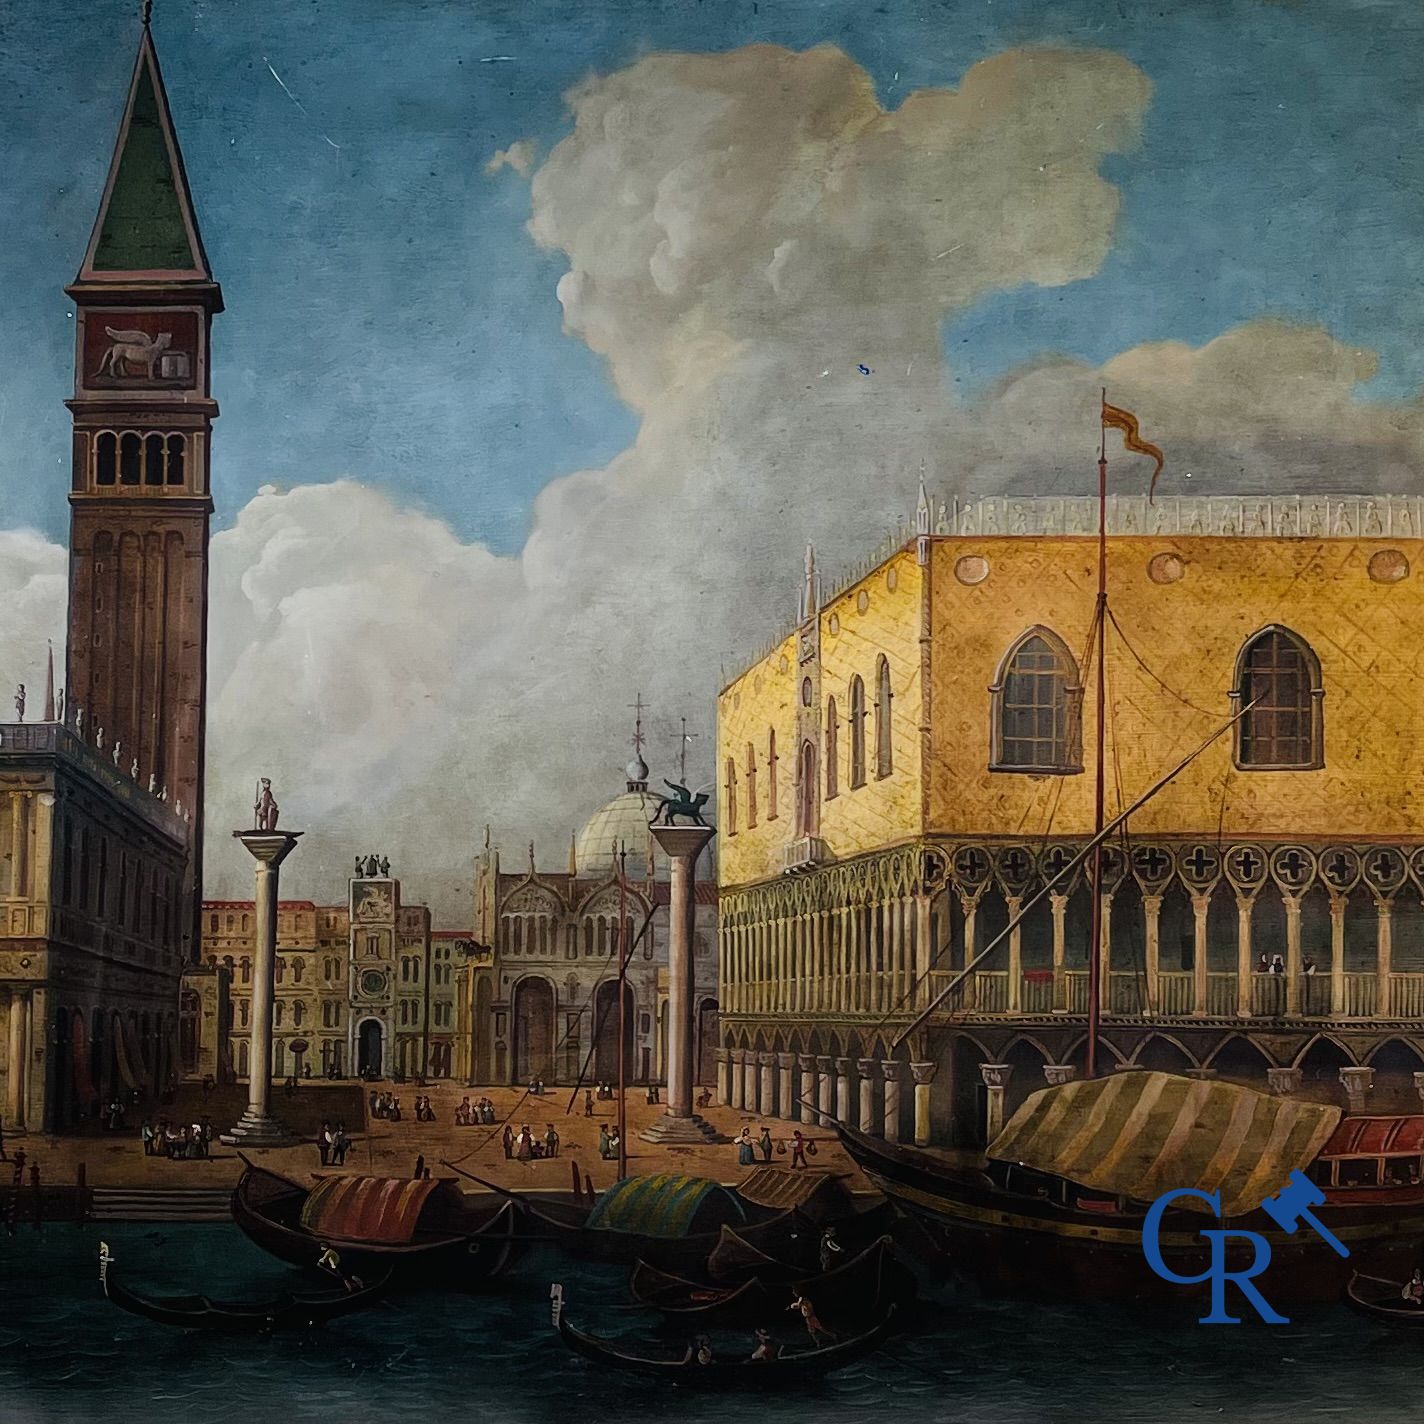 Painting: Carlo Canella (Verona 1800 - Milan 1879) View of St. Mark's Square in Venice. 